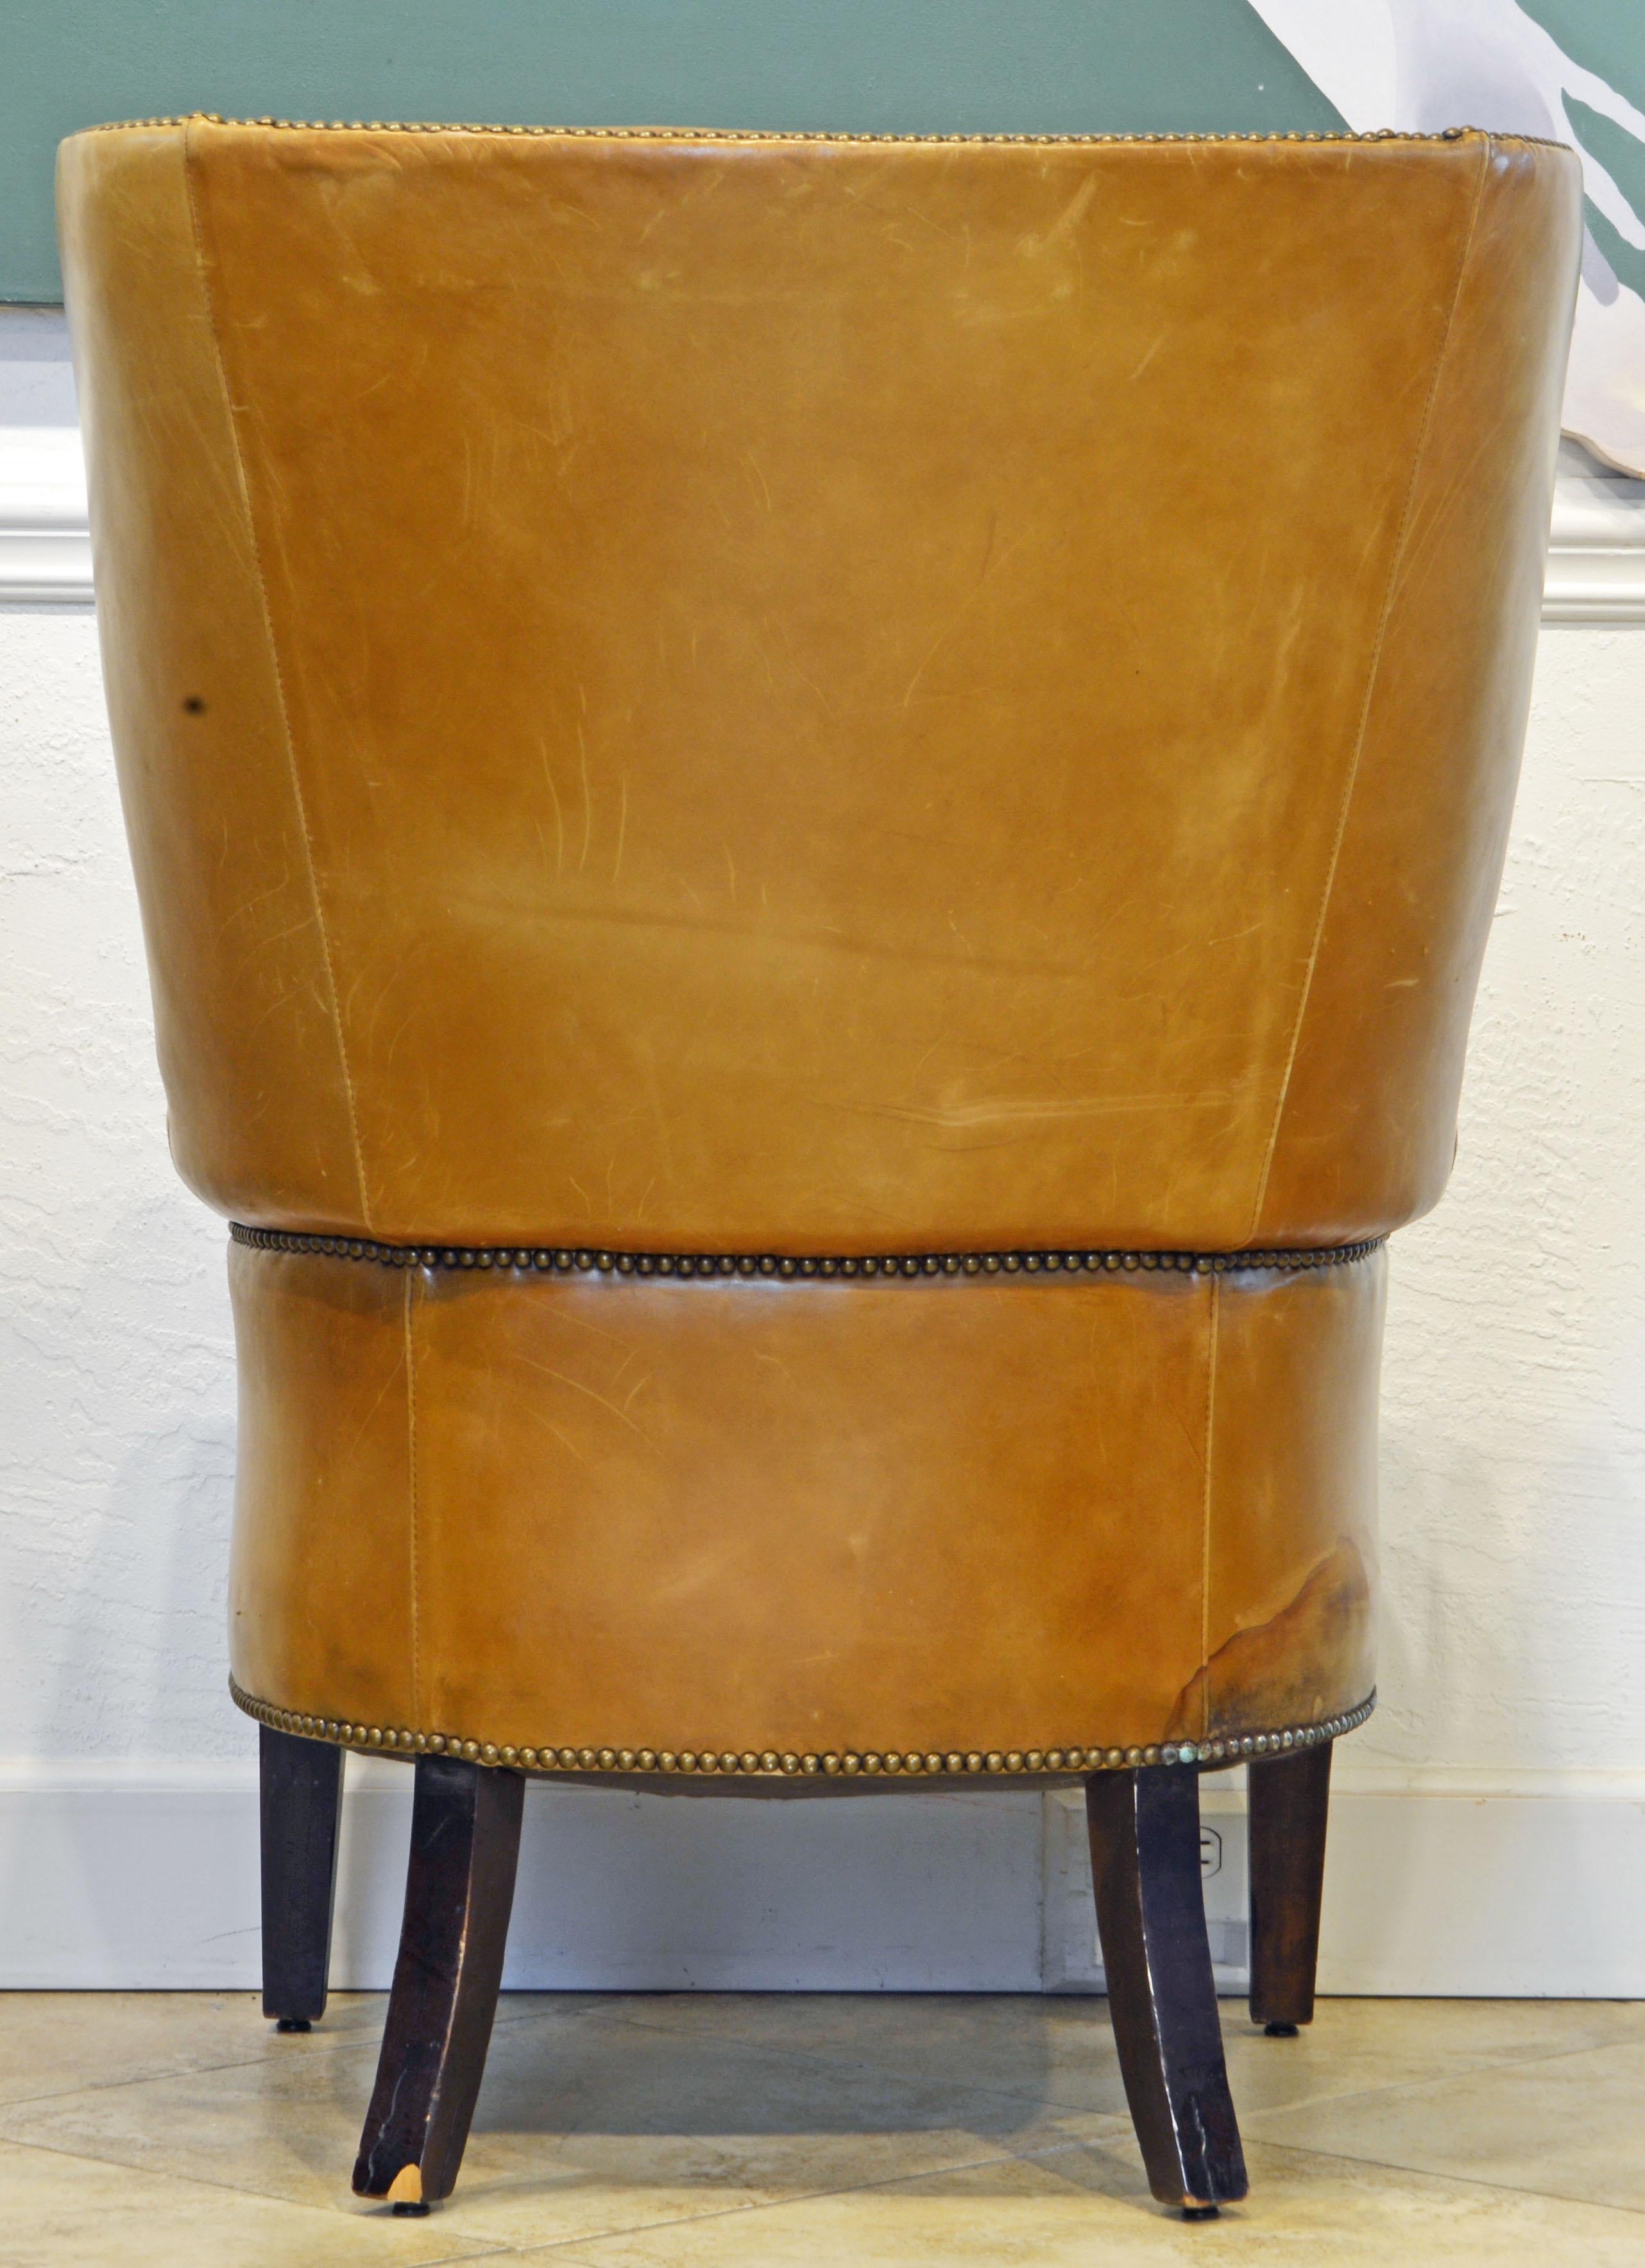 Queen Anne American Vintage Leather Covered and Nail Head Trimmed Wing Back Chair, 20th C.